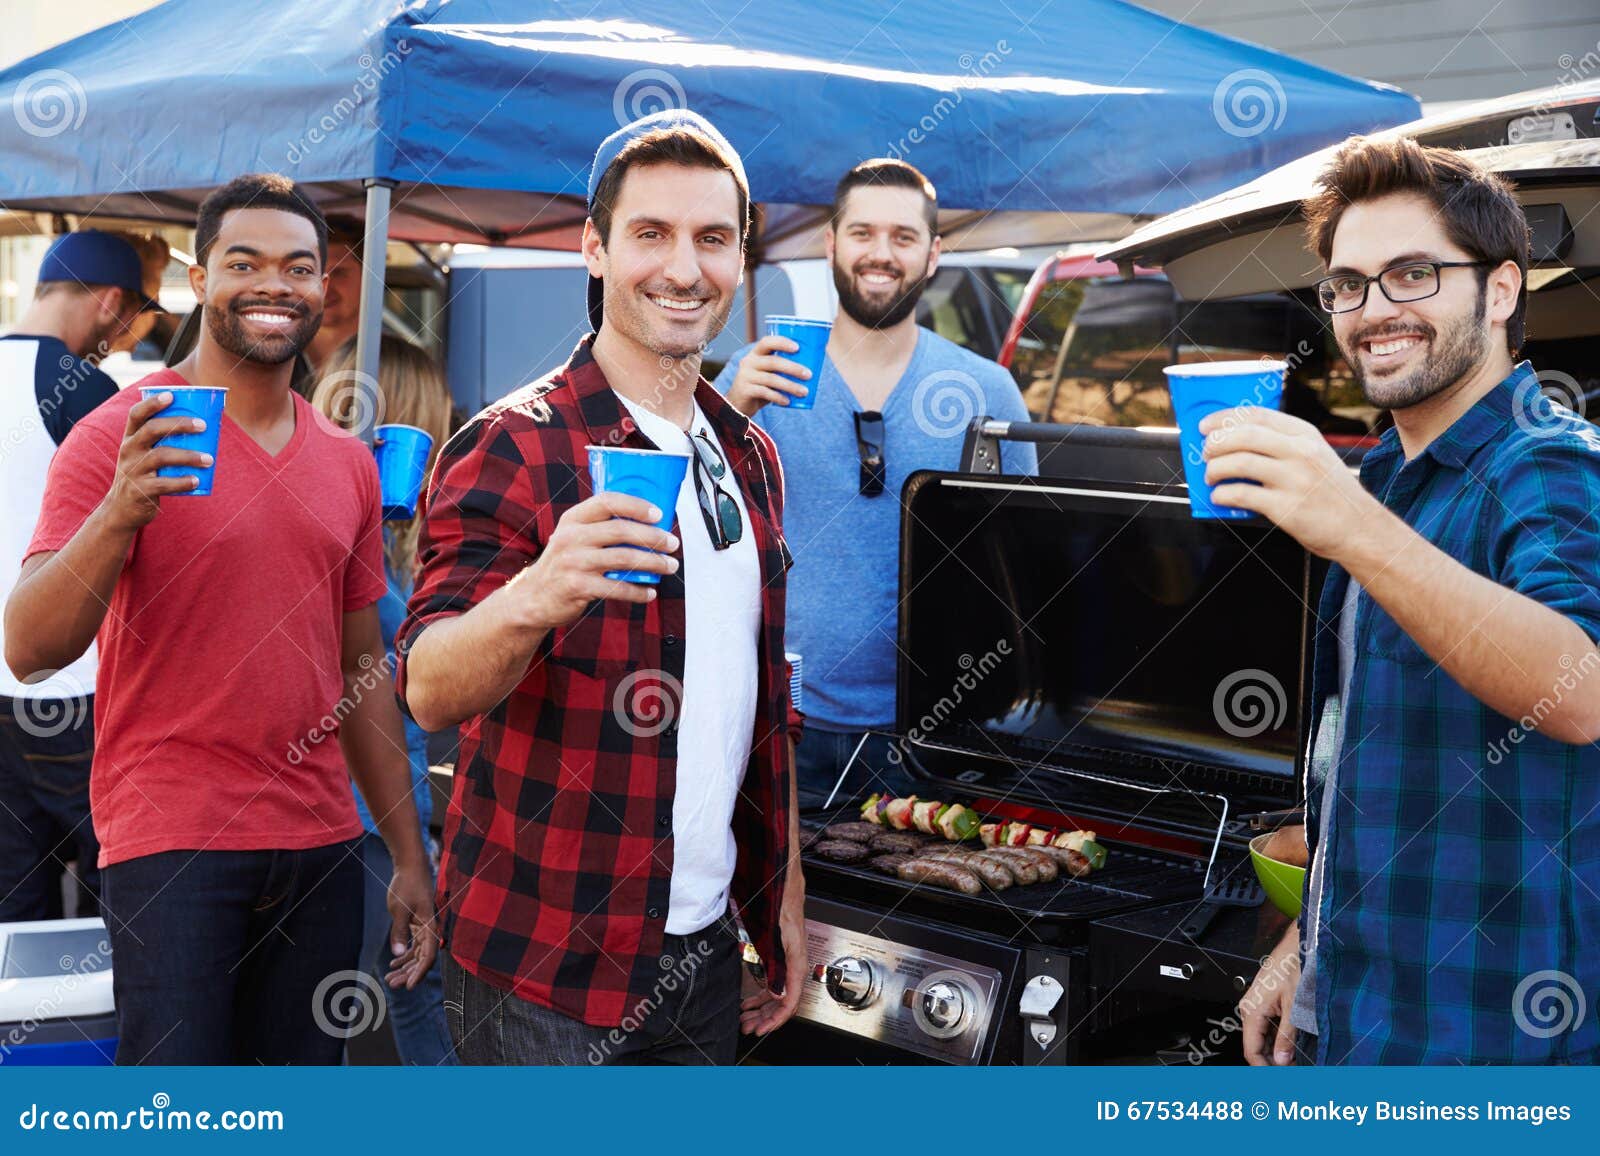 group of male sports fans tailgating in stadium car park